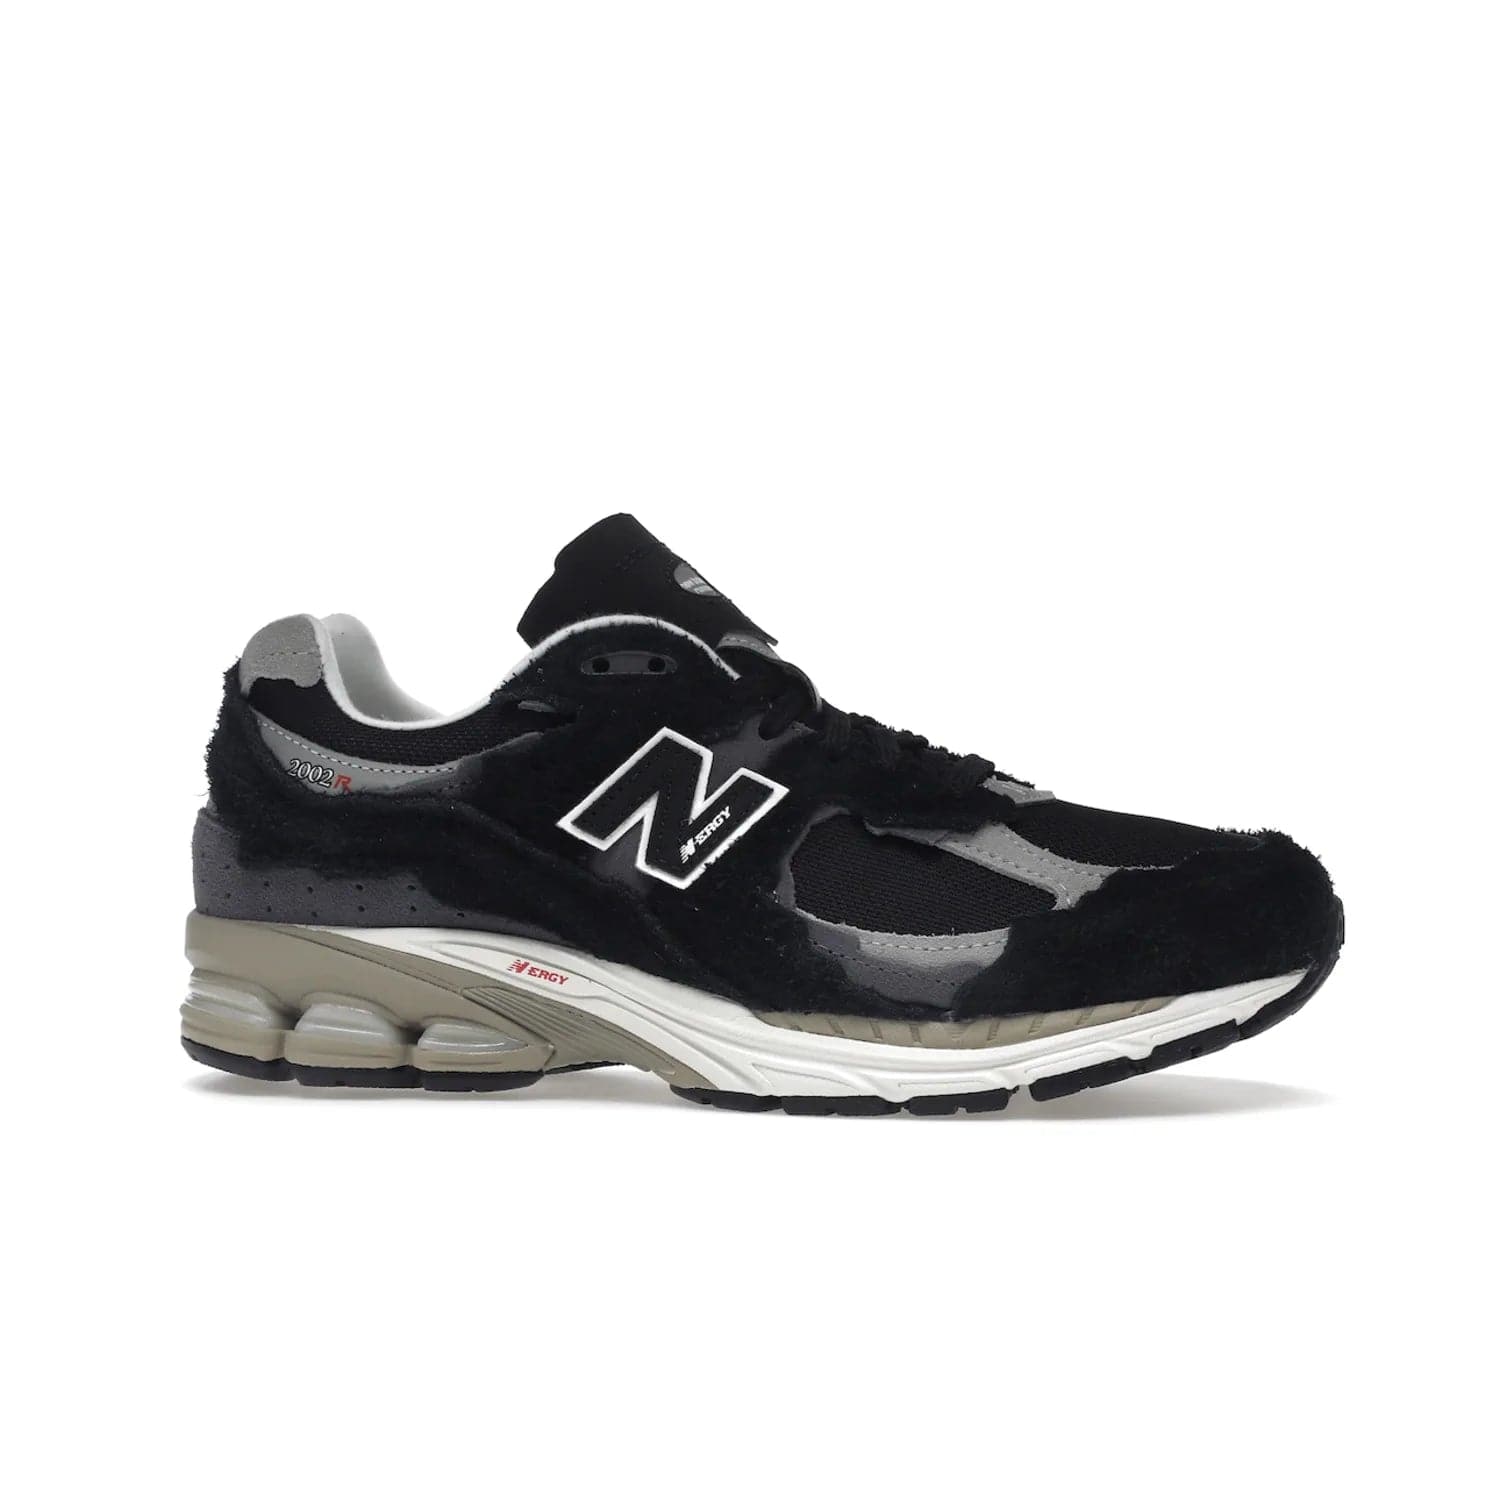 New Balance 2002R Protection Pack Black Grey - Image 2 - Only at www.BallersClubKickz.com - Look stylish in the New Balance 2002R Protection Pack Black Grey. Uppers constructed from premium materials like mesh and synthetic overlays. Iconic "N" emblem appears in white and black. ABZORB midsole for shock absorption and responsiveness. Black outsole for grip and traction. Lacing system offers customized fit and cushioned tongue and collar offer comfort and stability. Step up your style with this must-have